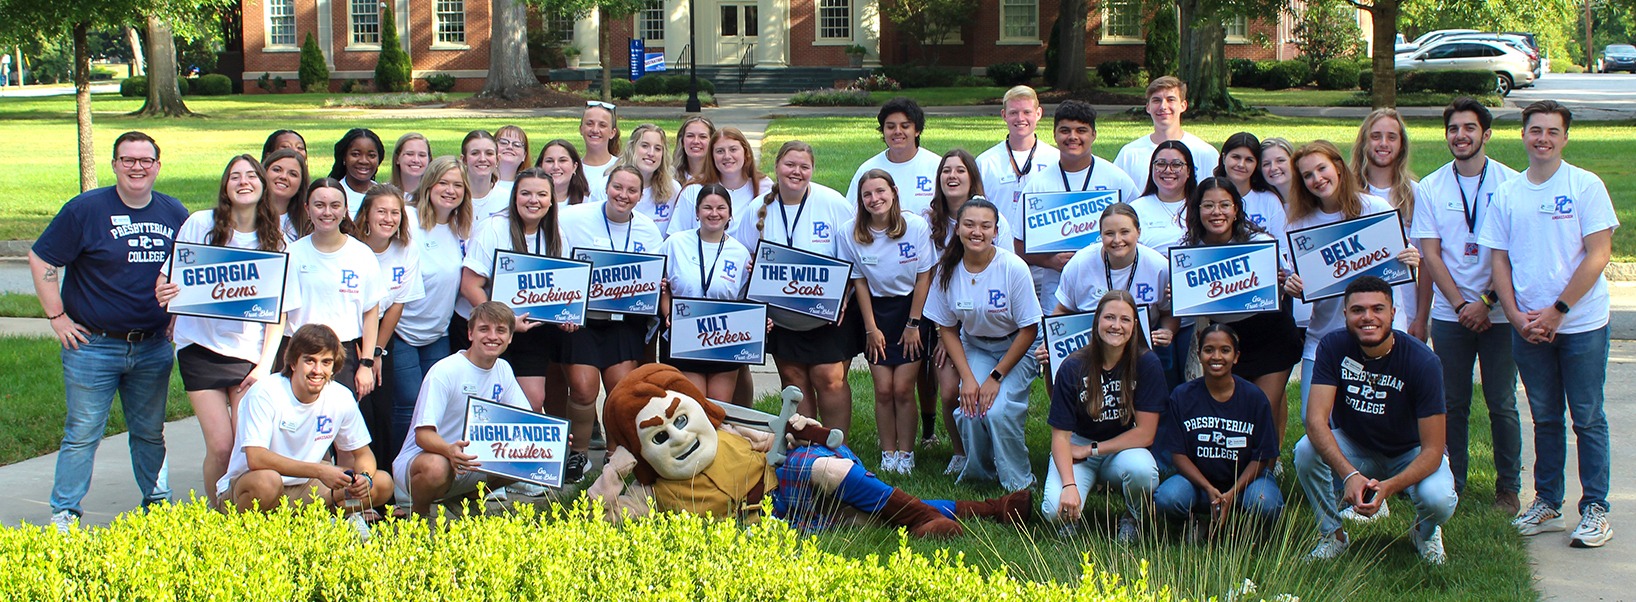 Group photo of student ambassadors and Scotty on the lawn in front of Smith Administration Building